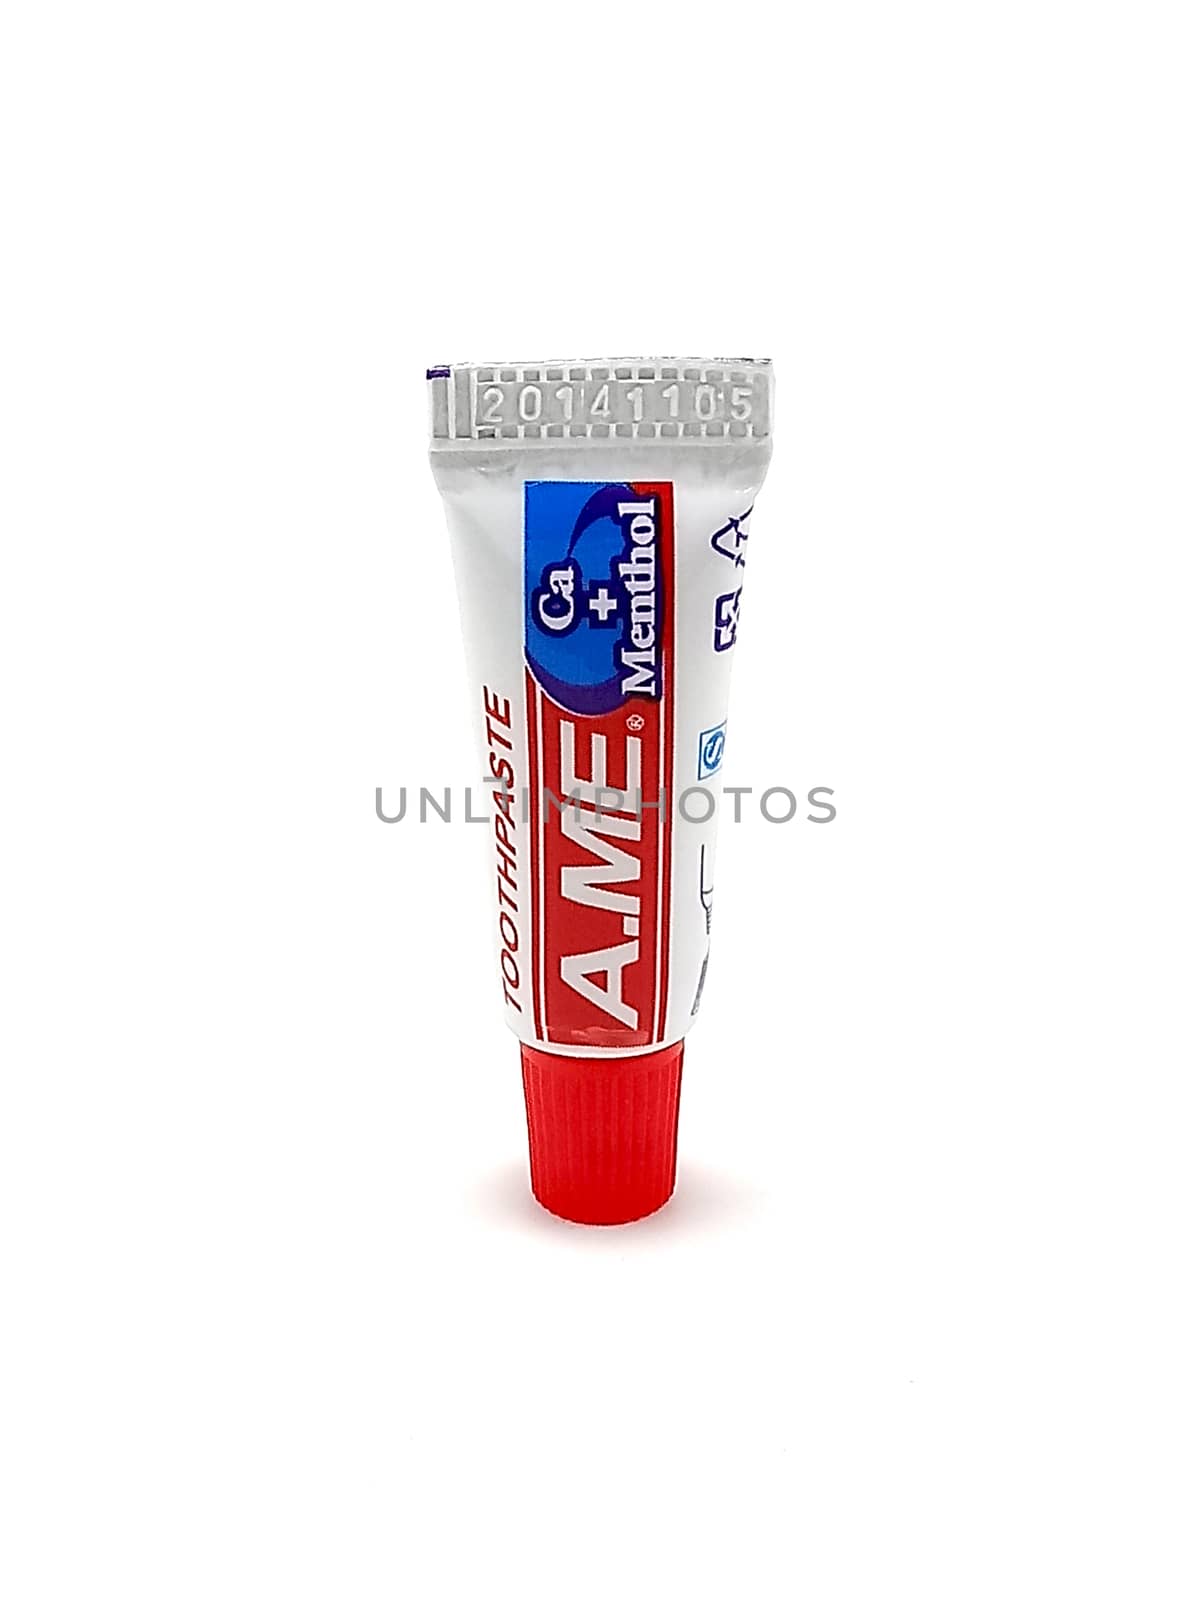 Ame toothpaste tube in Manila, Philippines by imwaltersy